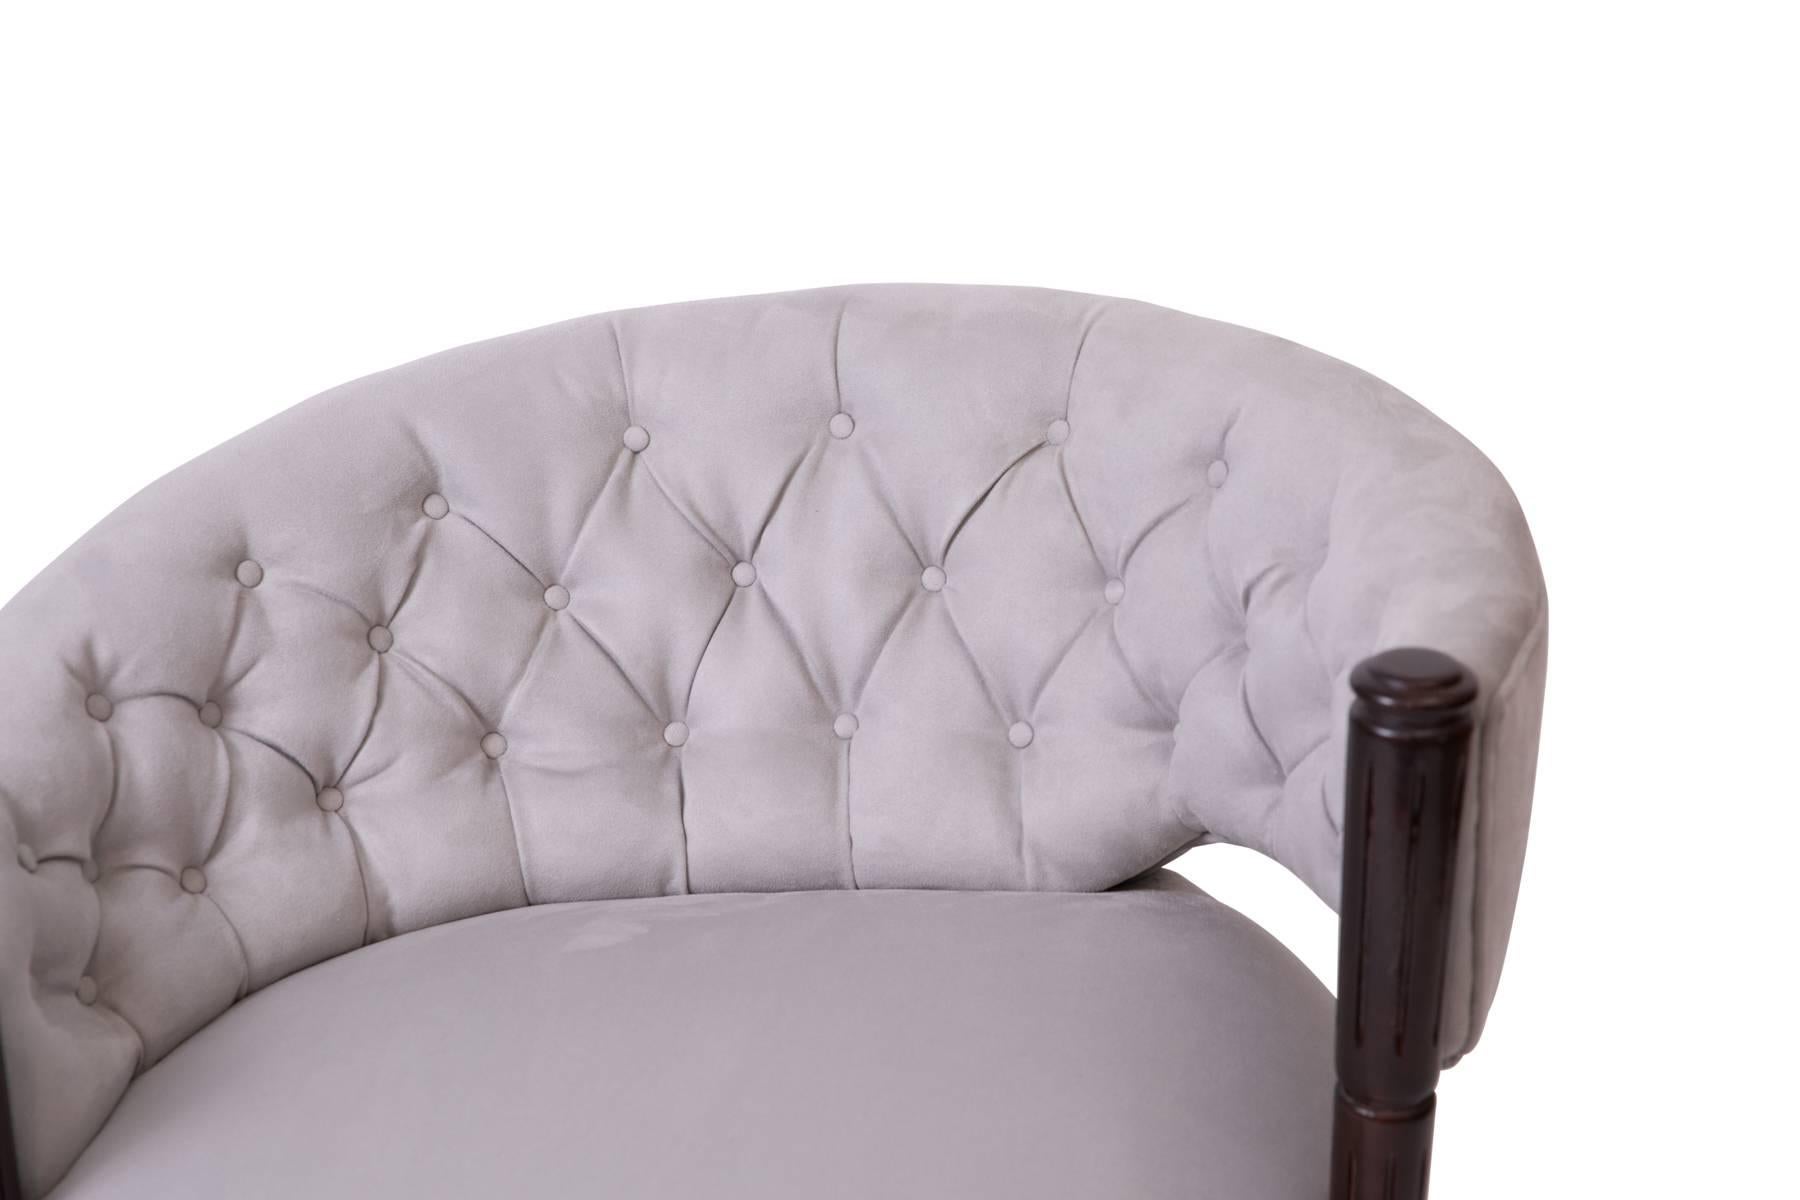 Mid-Century Modern Sculptural 1940s Diamond Tufted Lounge Chairs